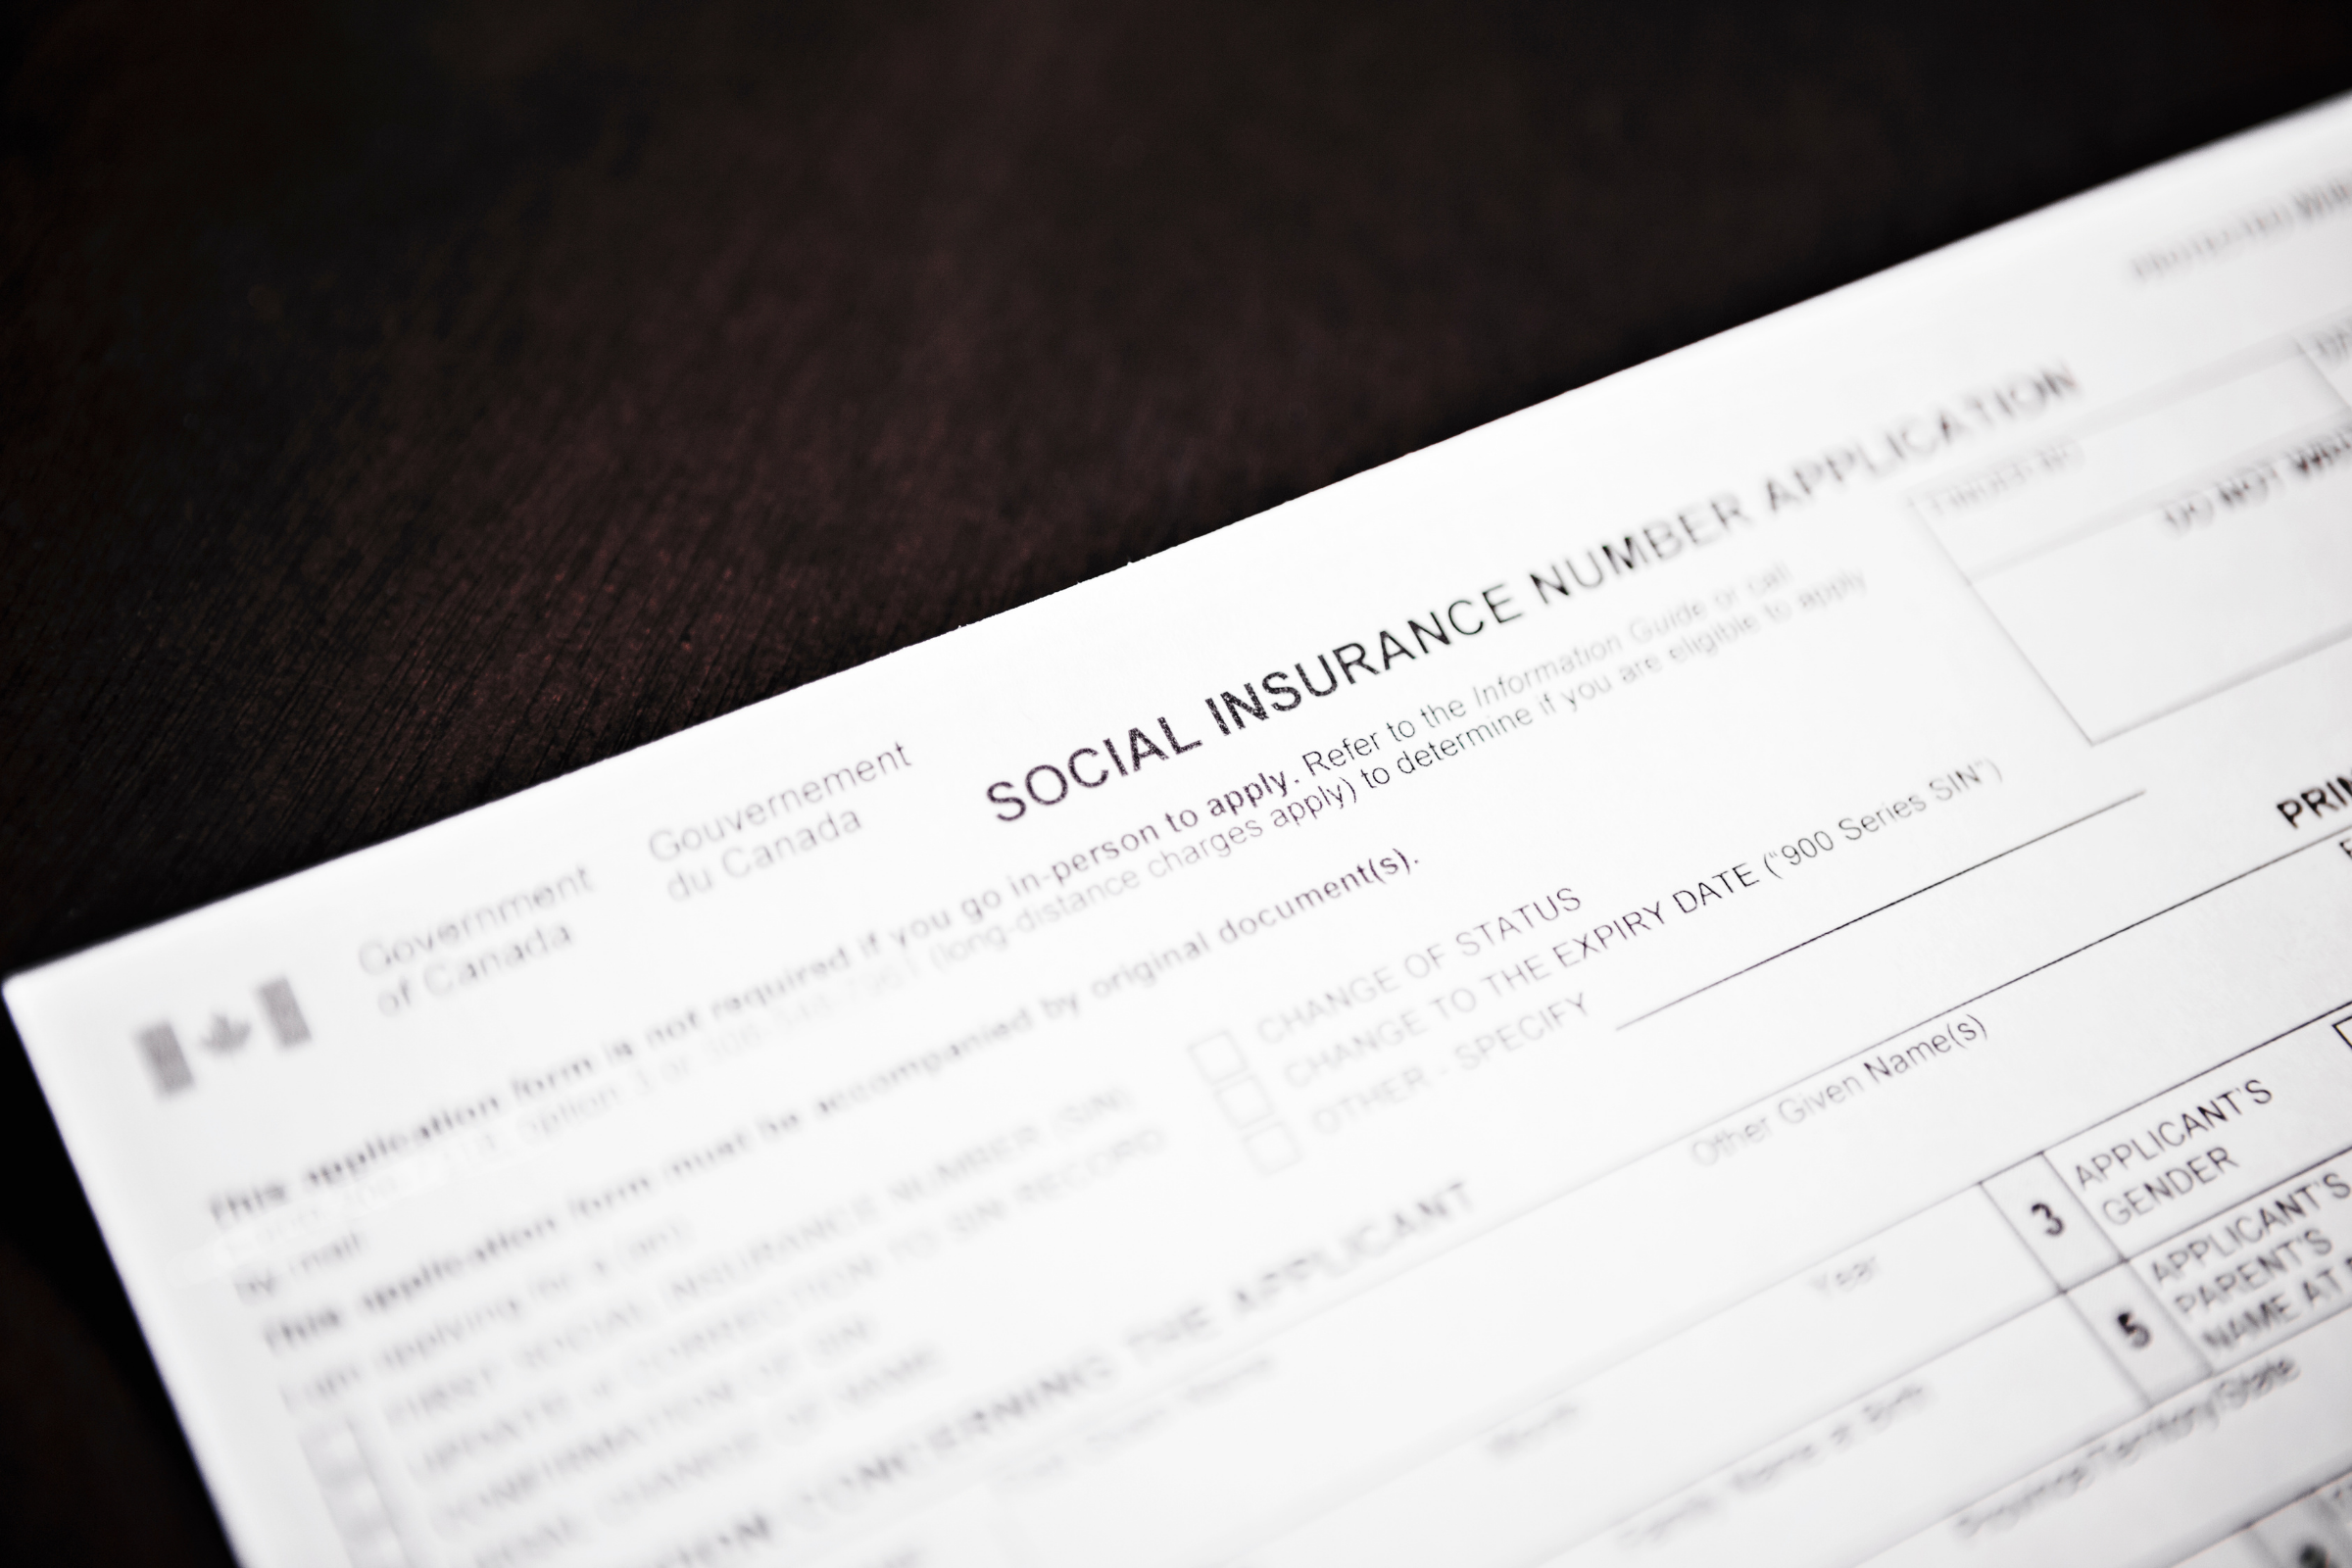 Getting your Social Insurance Number